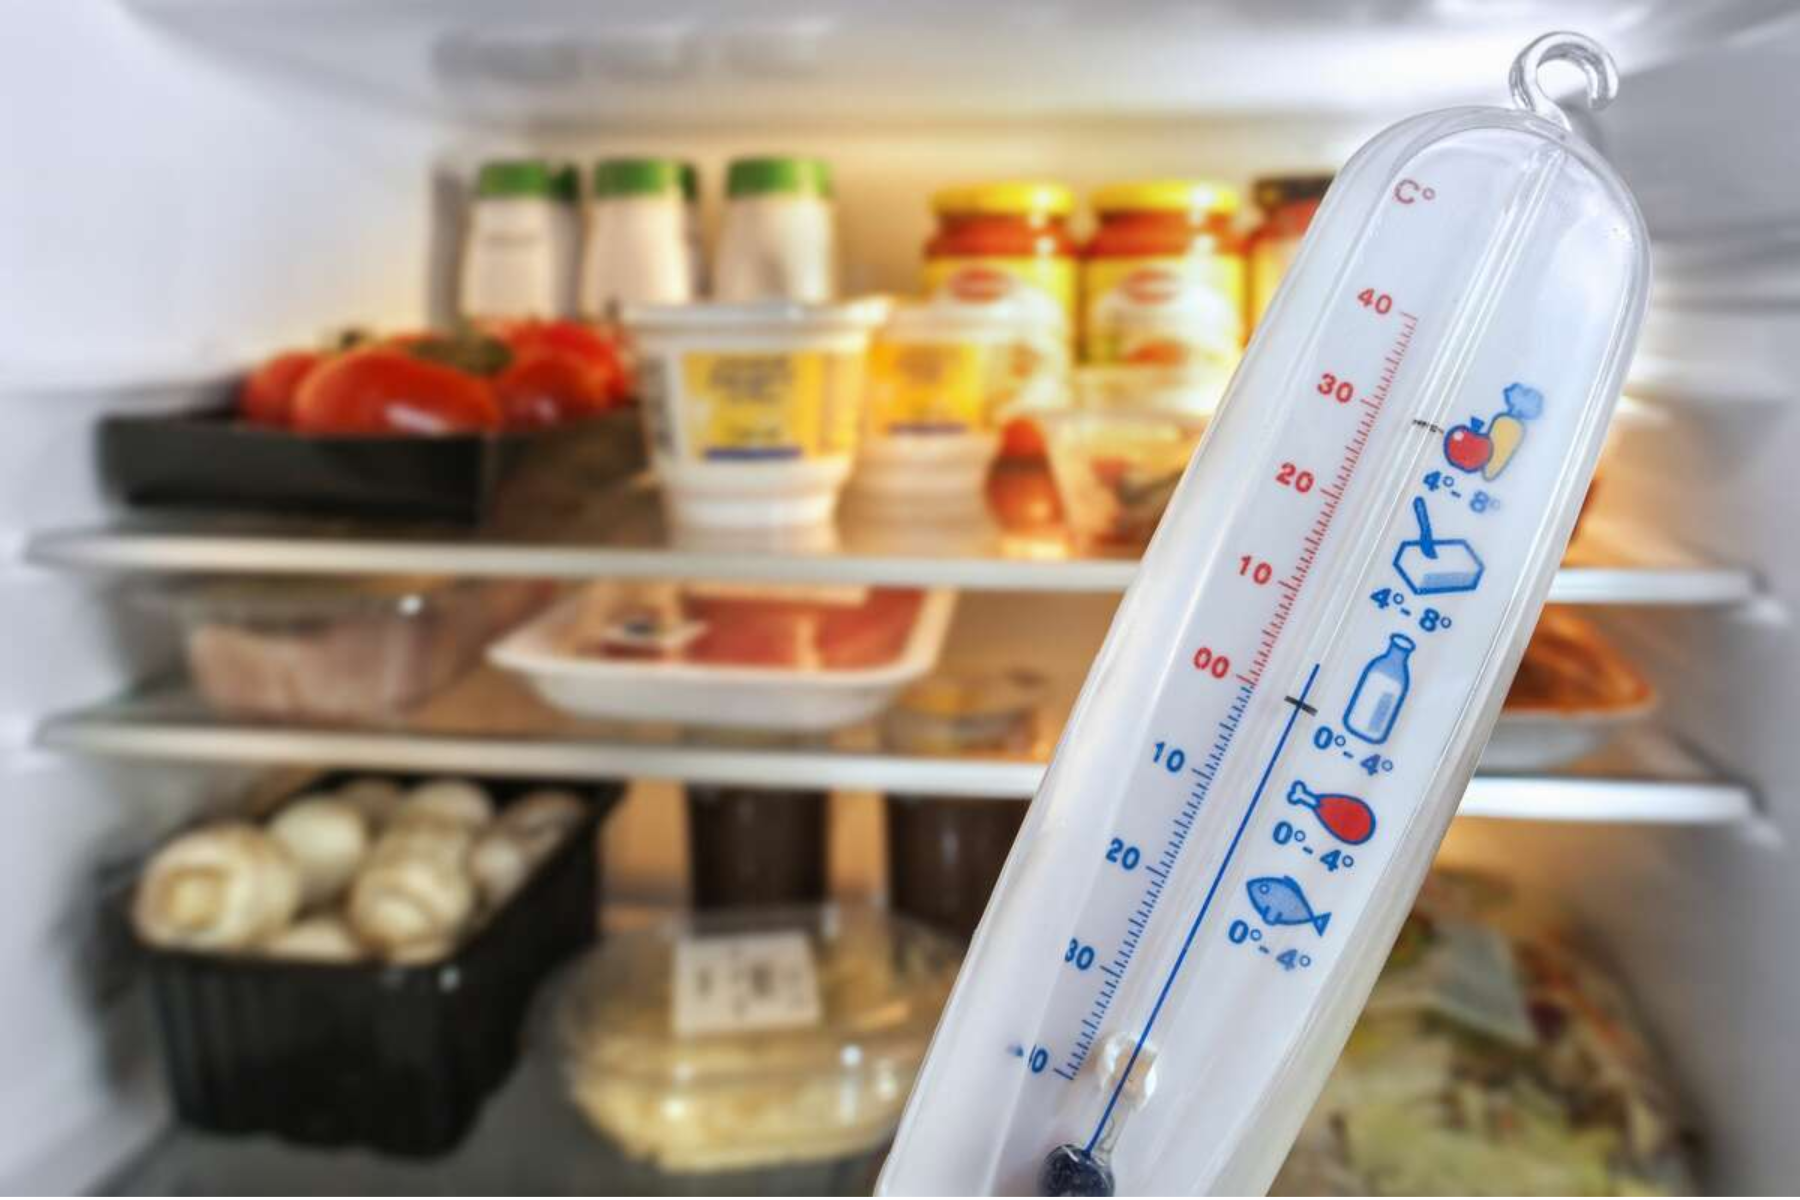 A refrigerator with various types of foods and temperature gauge